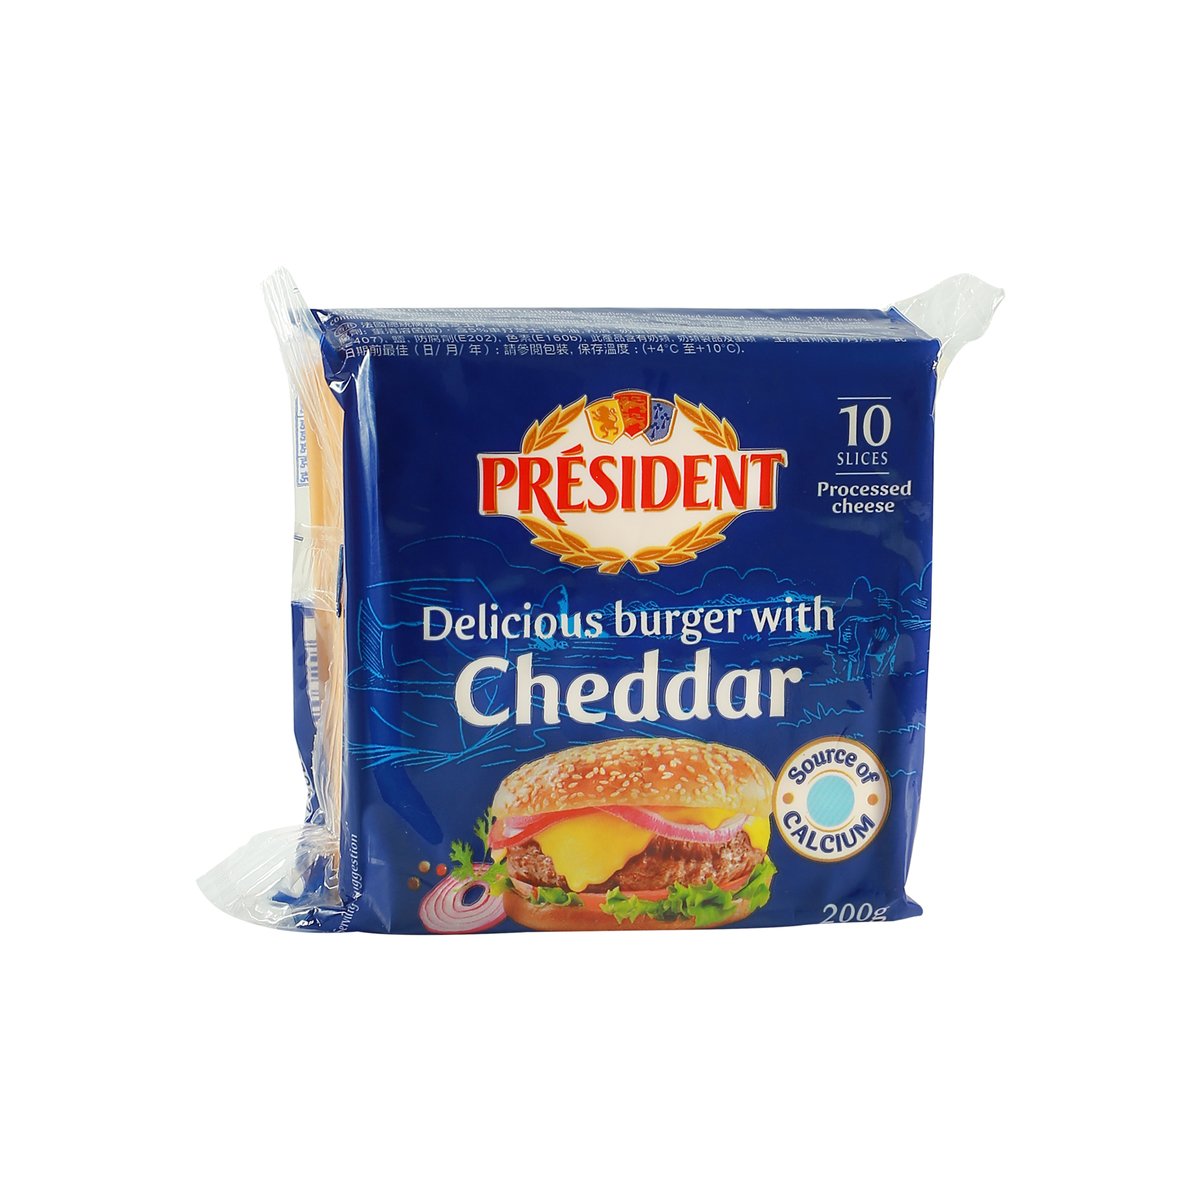 President Processed Cheddar Cheese 10 Slices 200 g